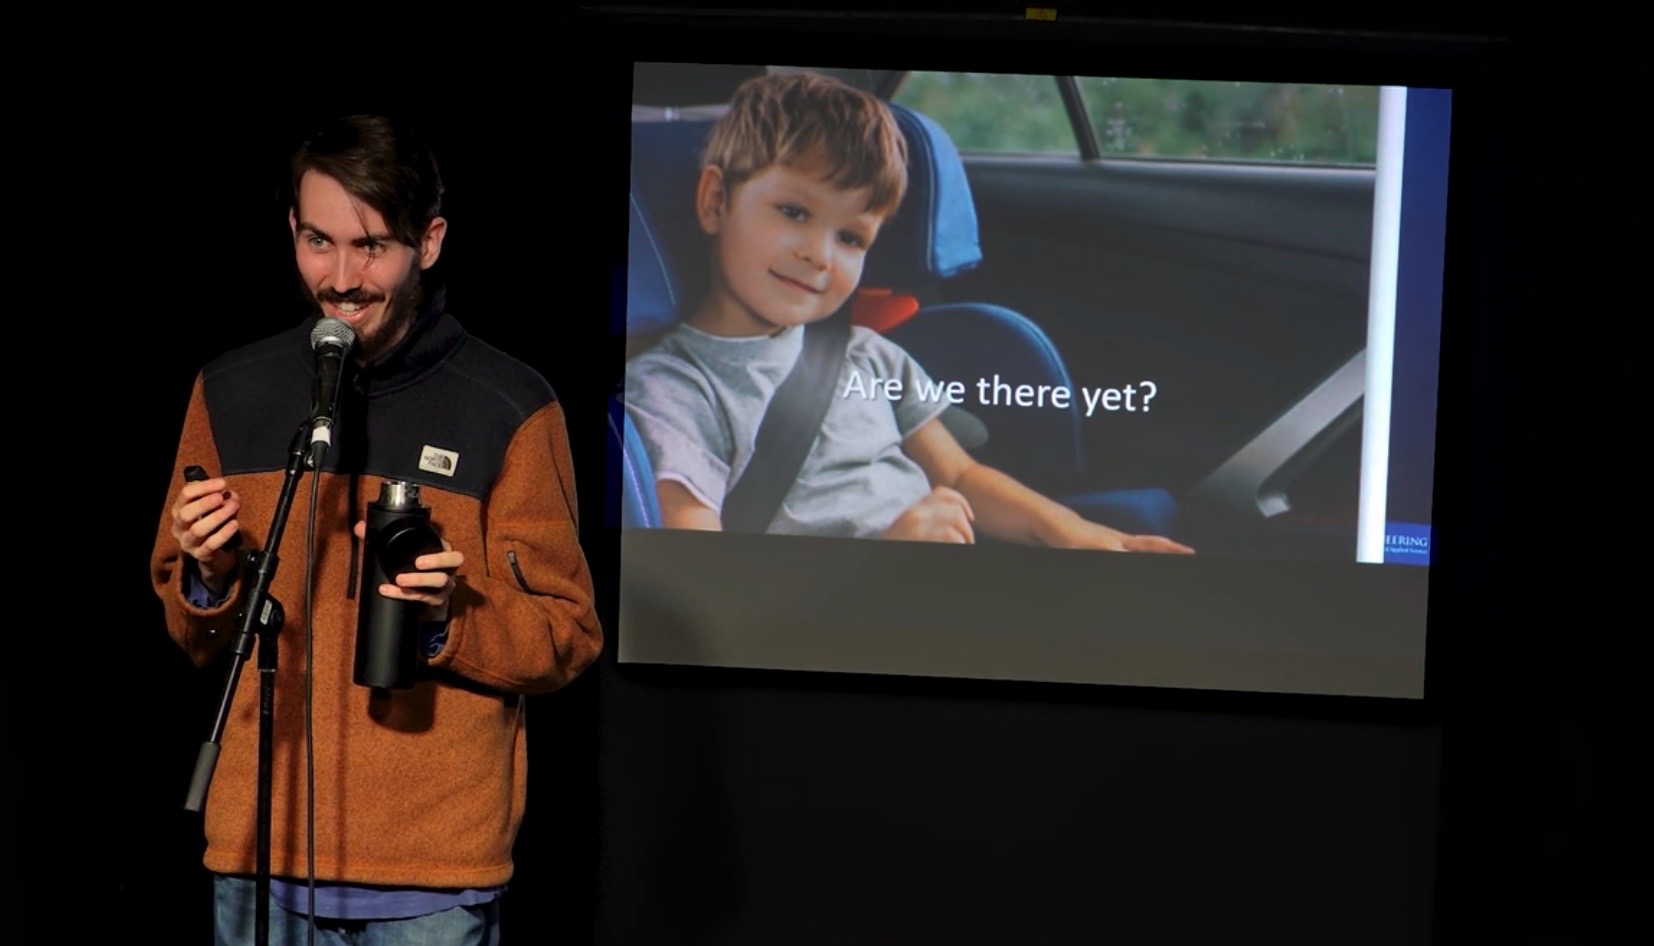 A comedian peforms on stage with a large projection screen and an image of a child wearing a seatbelt in a car. Text on the photo says "are we there yet?"